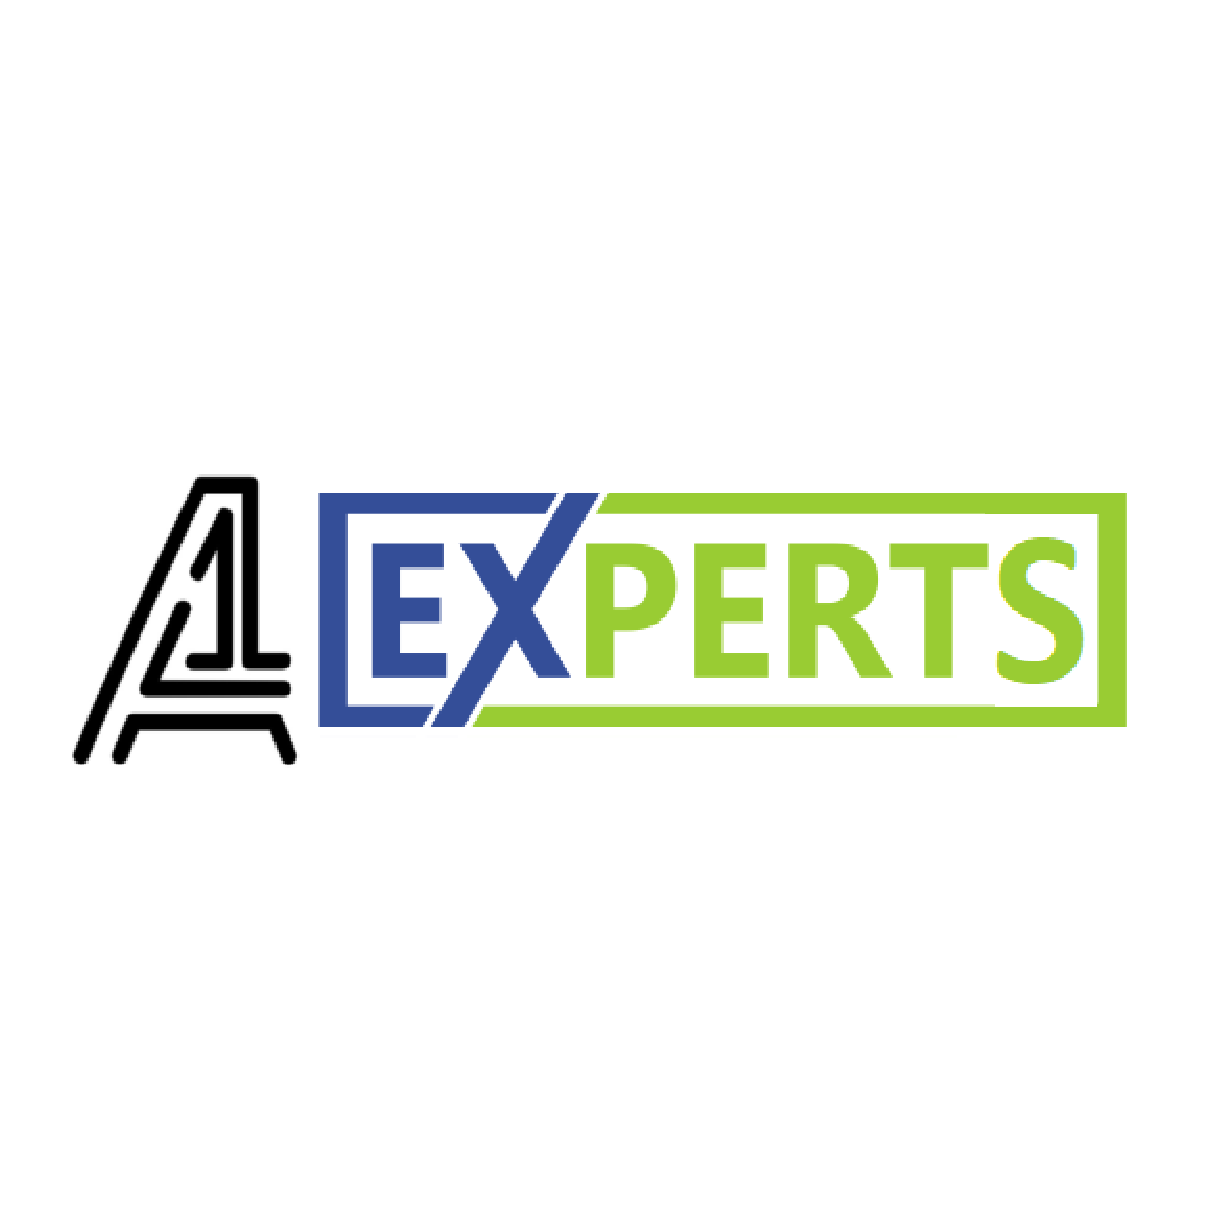 A1 Experts